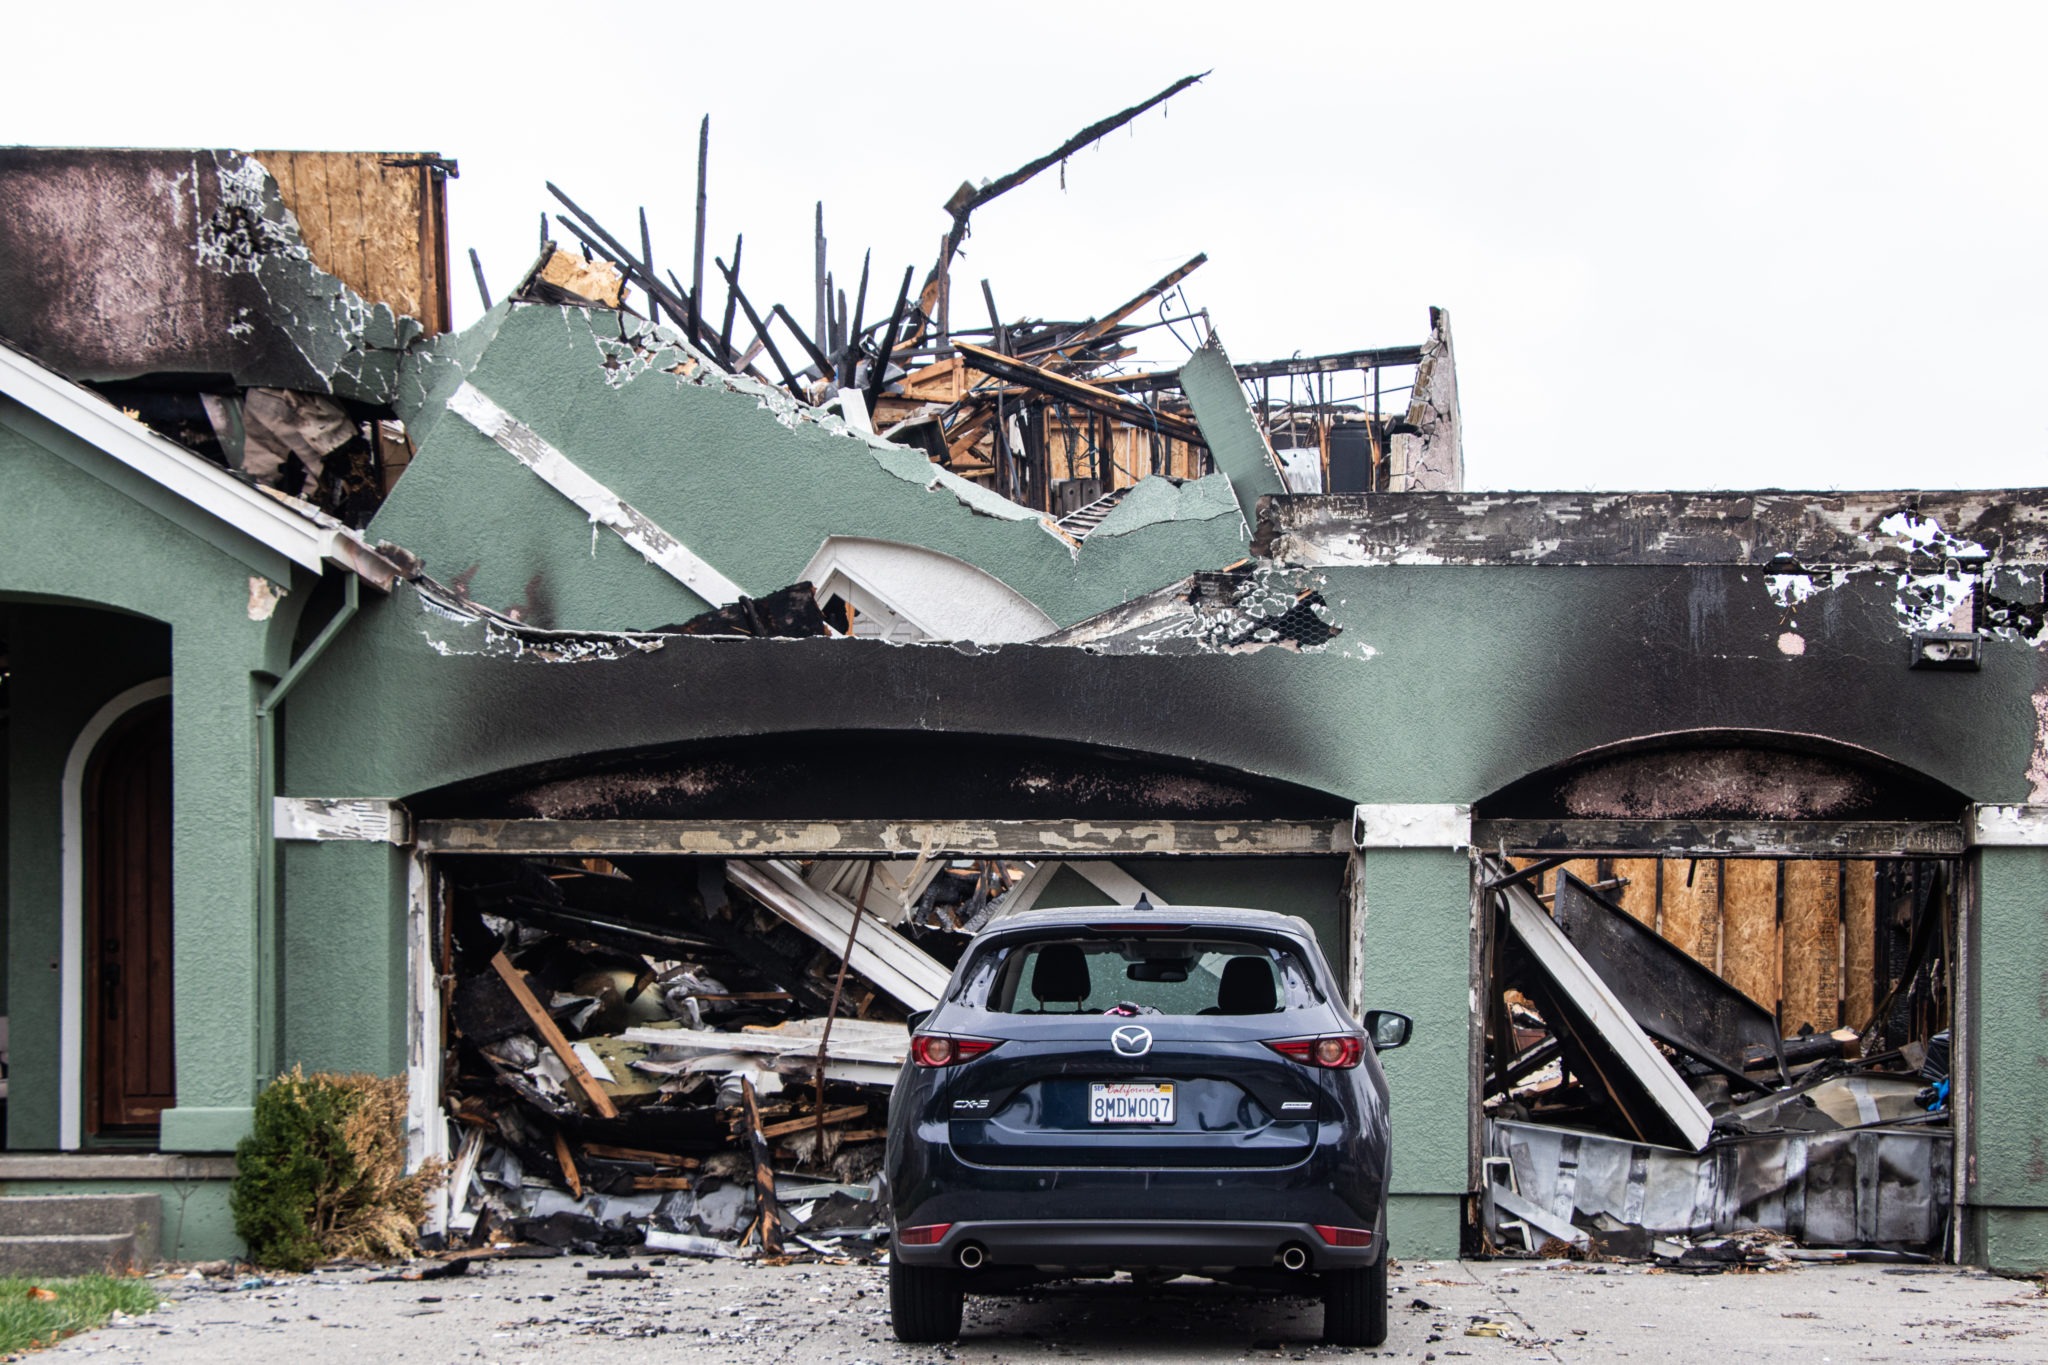 A severely fire-damaged house with a collapsed roof and charred walls is pictured, presenting a scene that might capture the interest of Berkeley Journalism students. A blue SUV is parked in front of the garage, which has significant structural damage and debris scattered around.